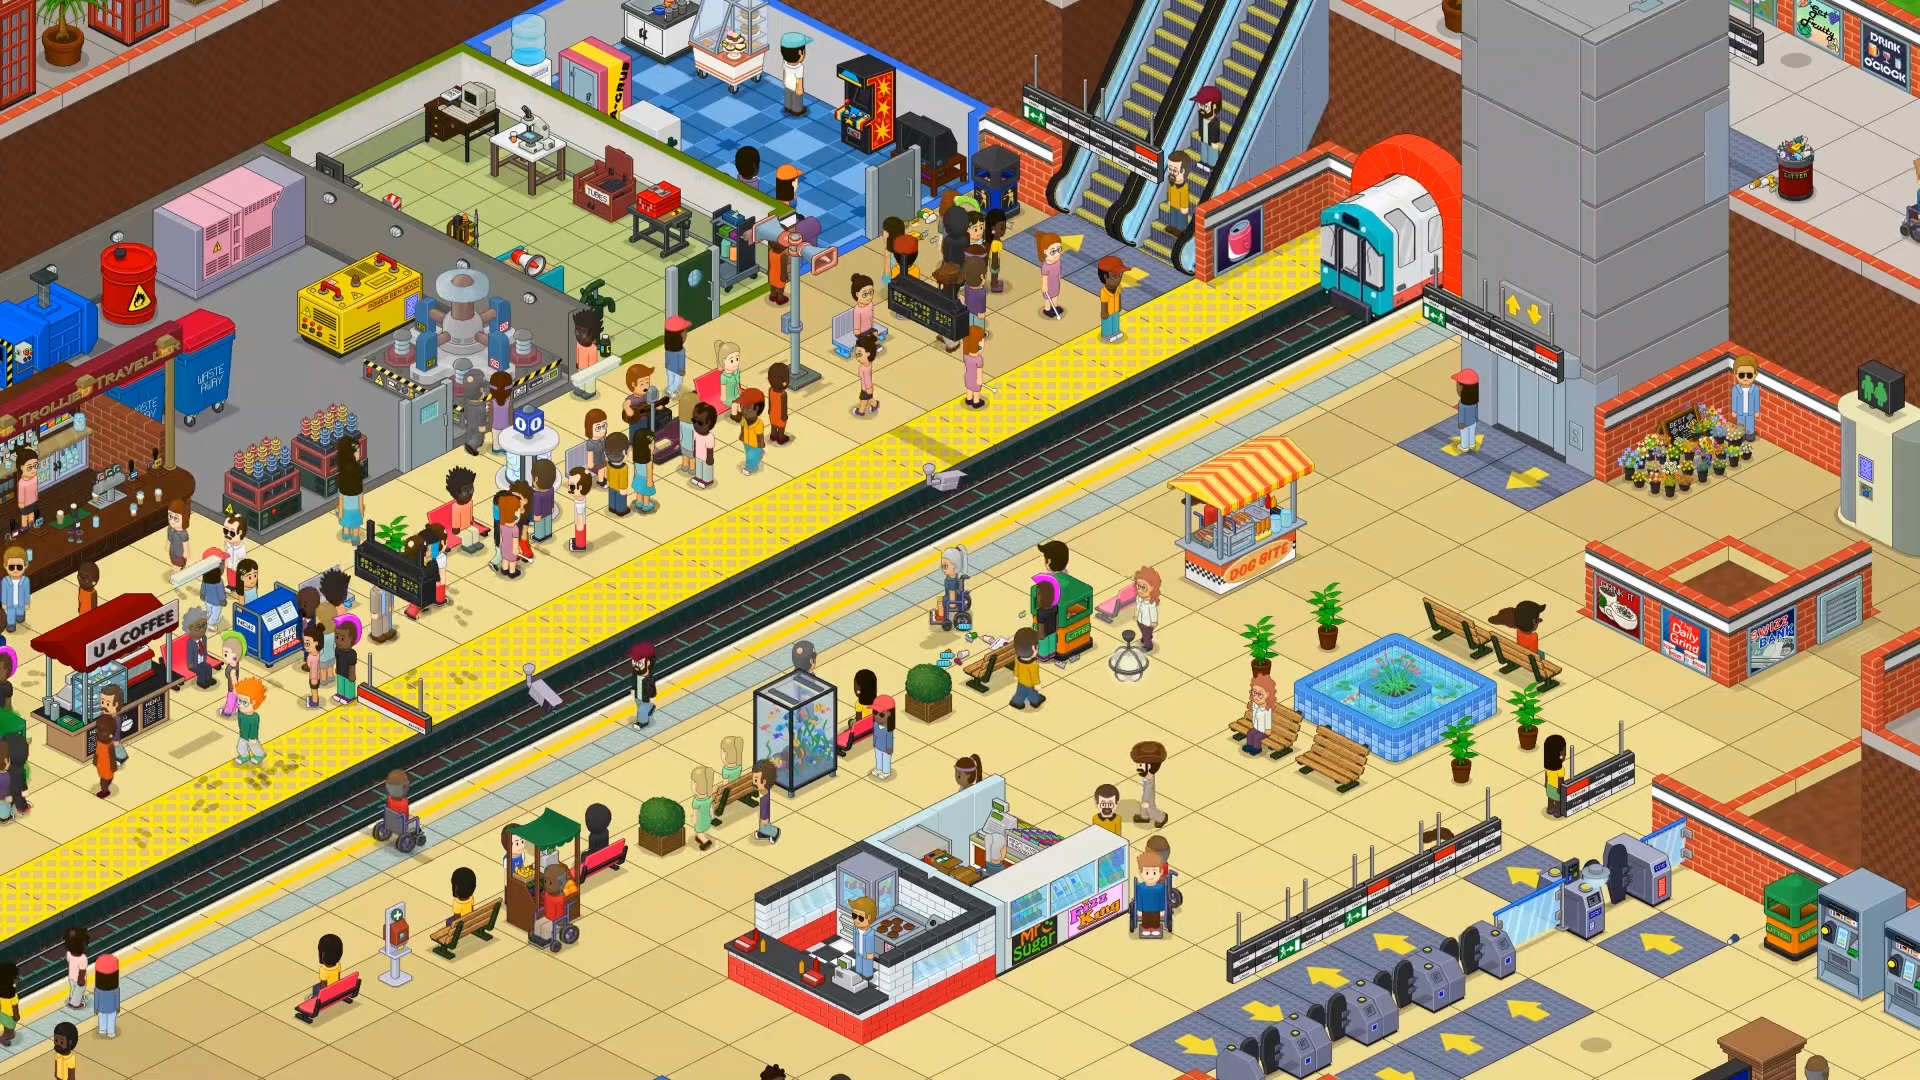 Overcrowd: A Commute ‘Em Up Full Release Review – A Sim Management Game With A Difference